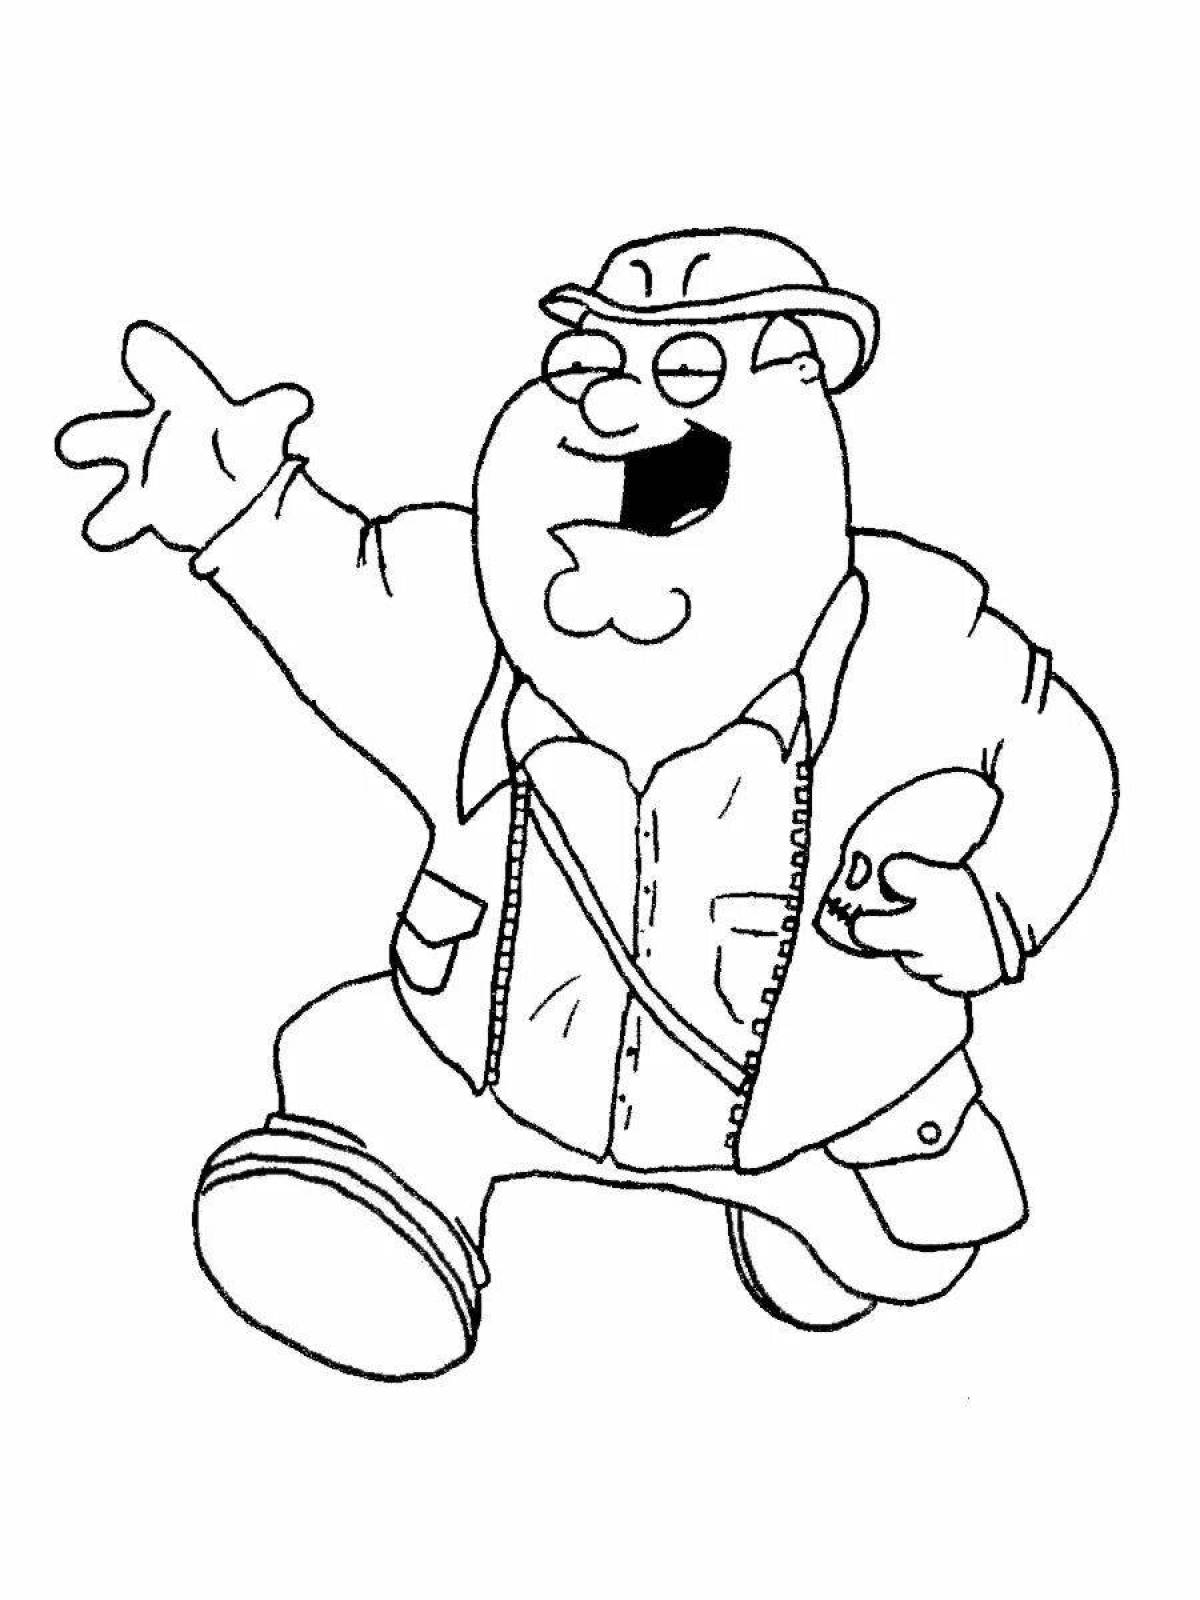 Attractive family guy coloring book